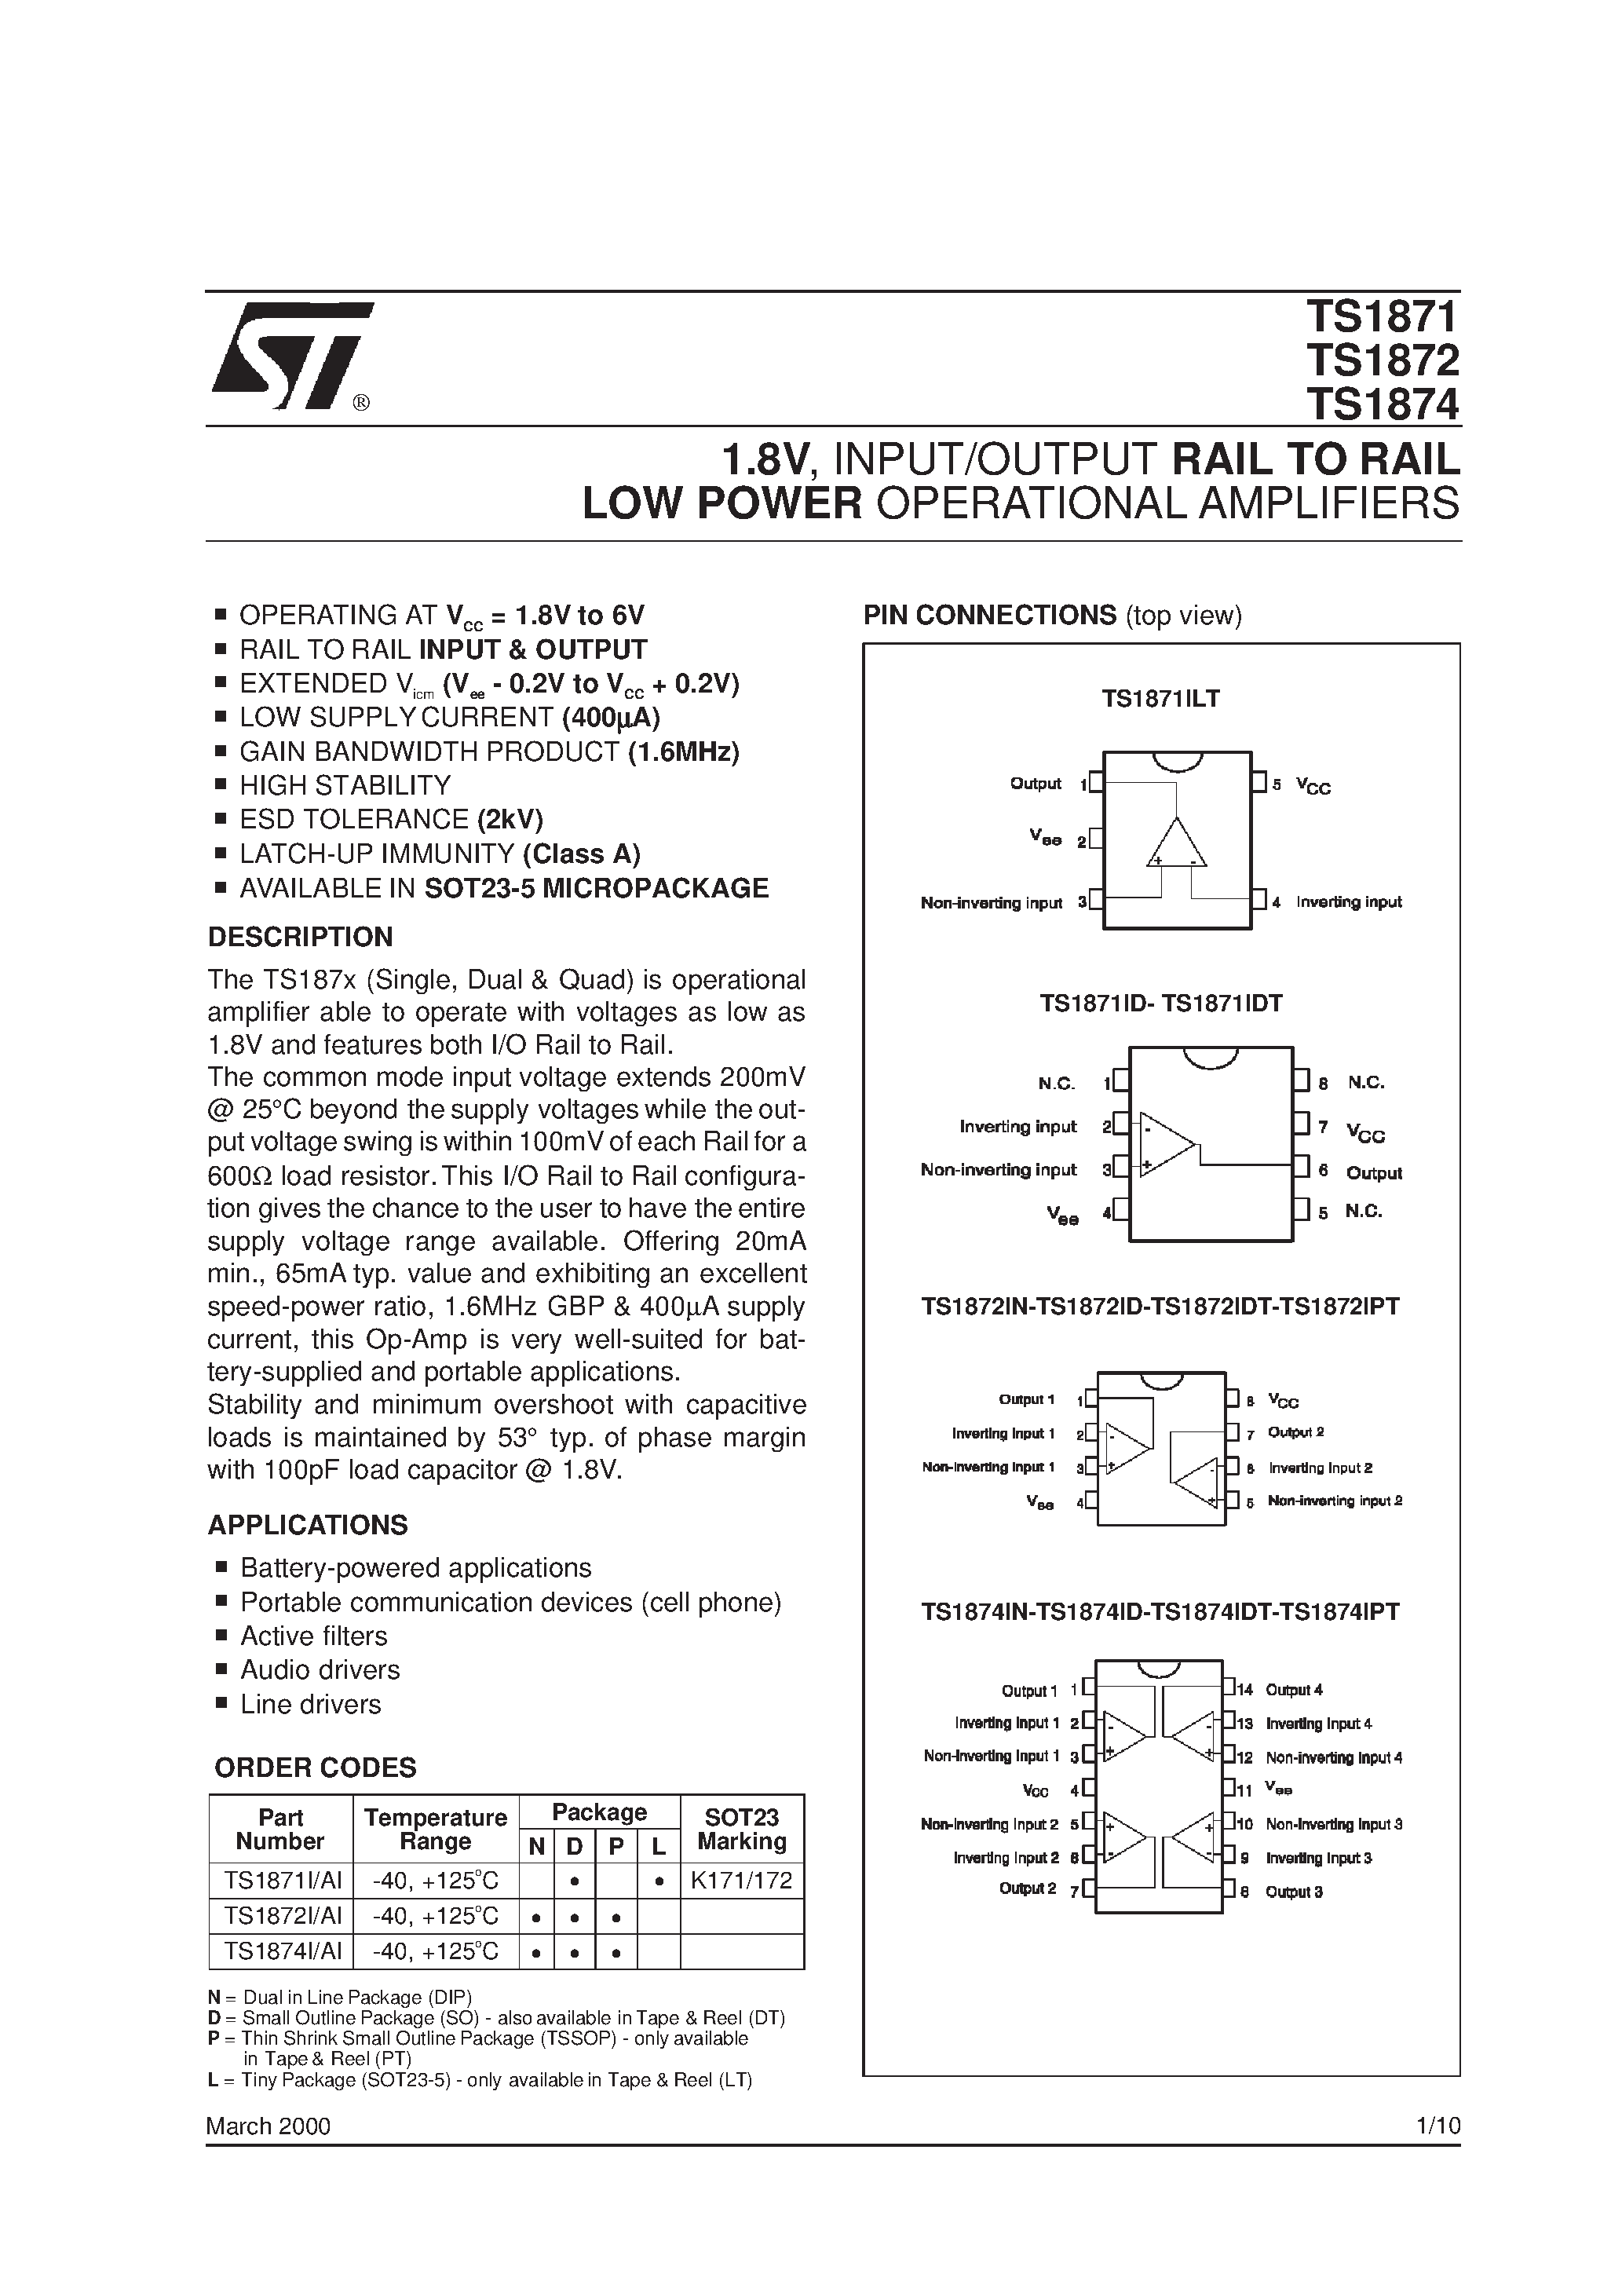 Datasheet TS1874I - 1.8V/ INPUT/OUTPUT RAIL TO RAIL LOW POWER OPERATIONAL AMPLIFIERS page 1